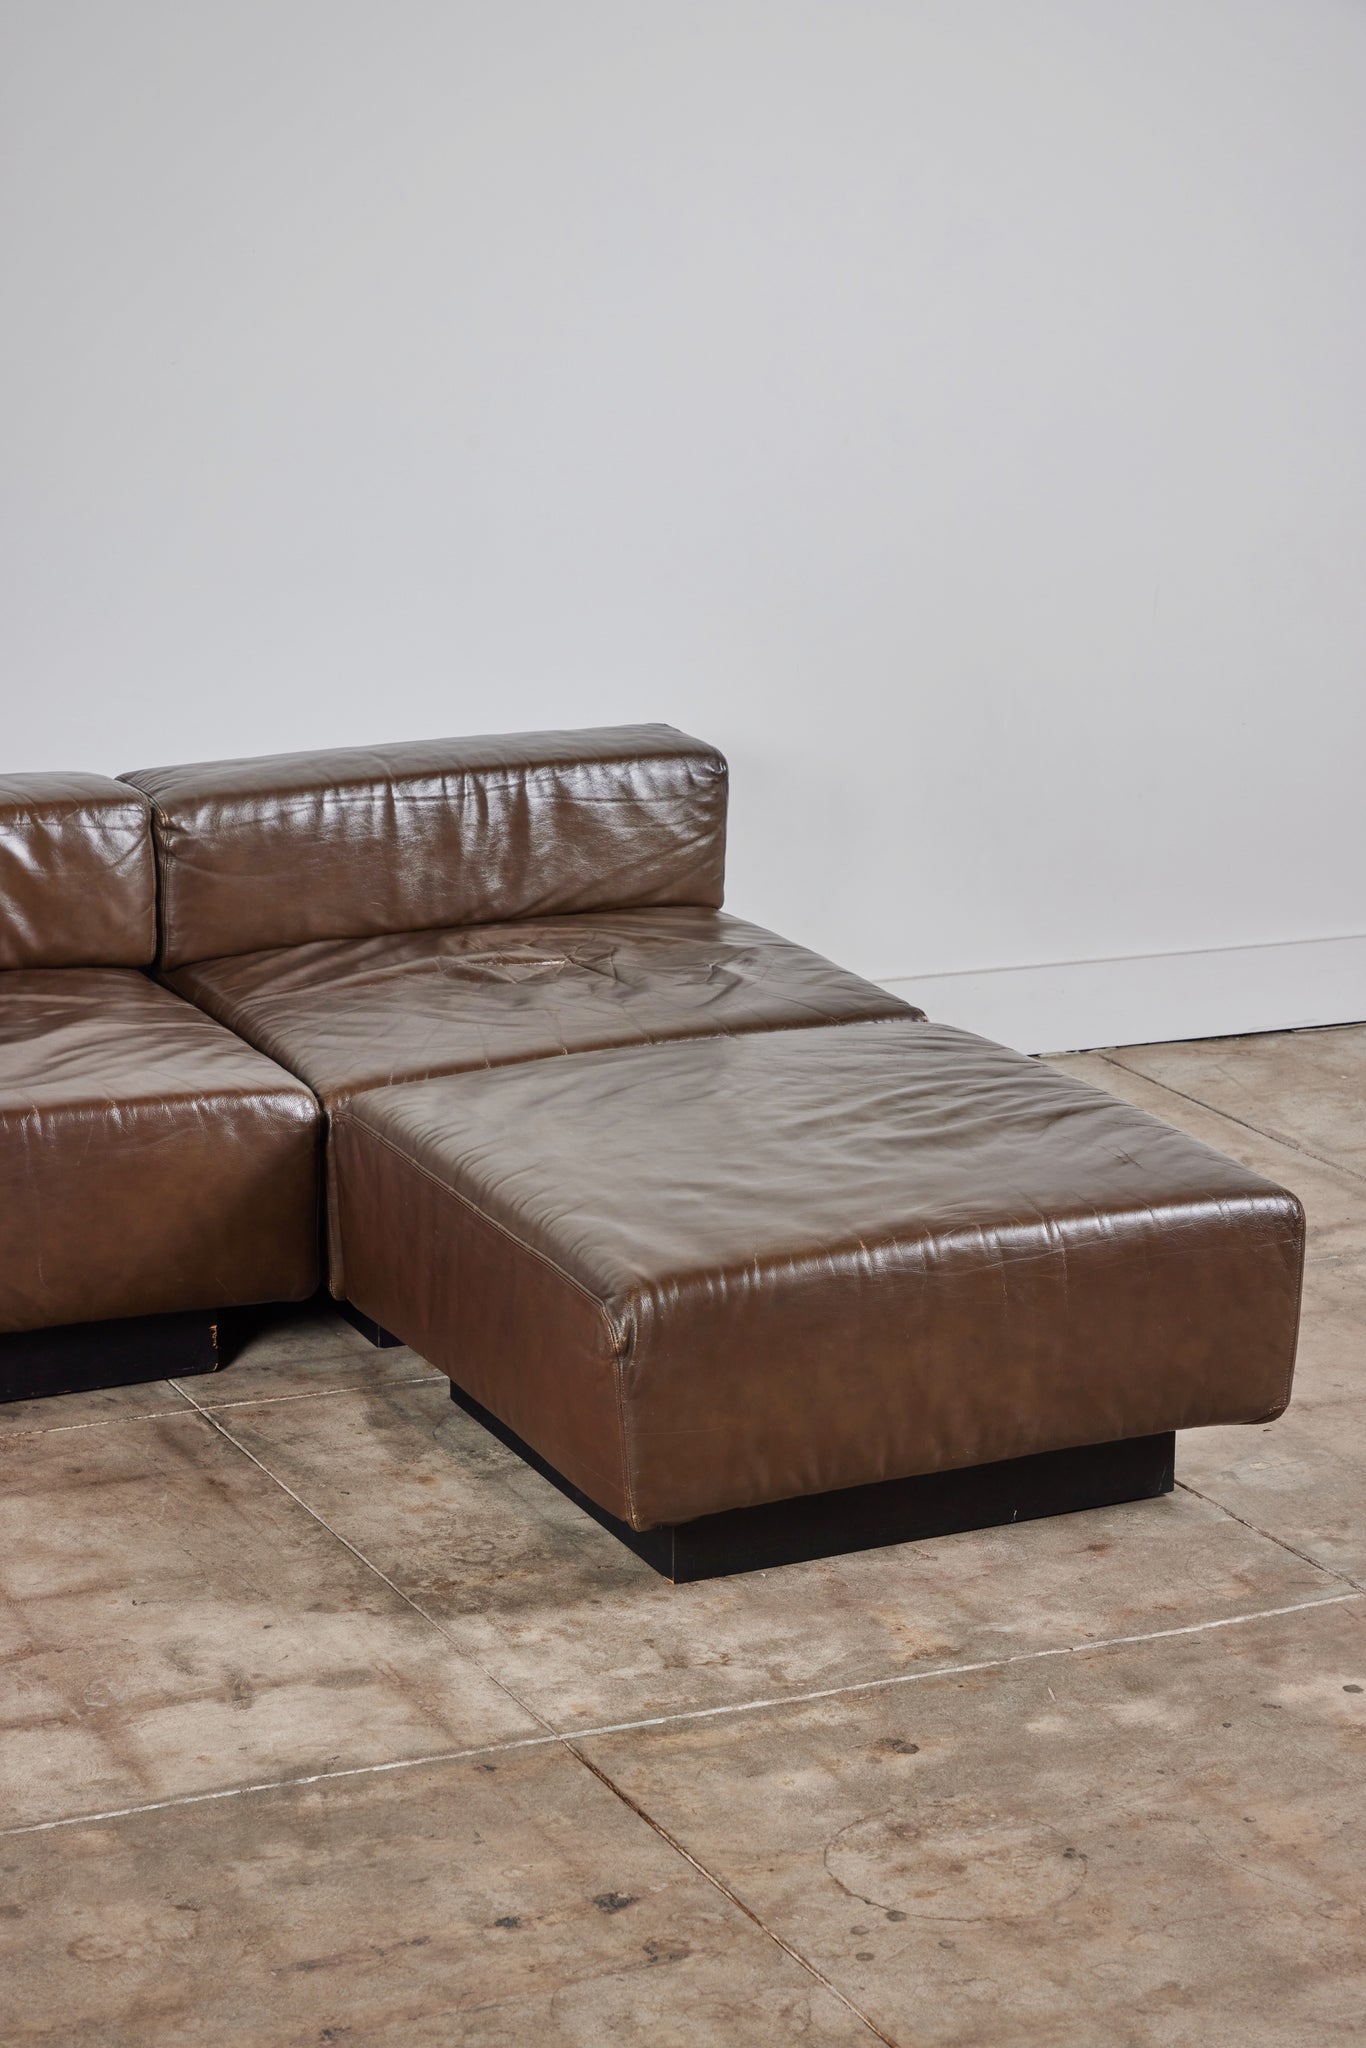 Harvey Probber "Cubo" Sectional Leather Sofa